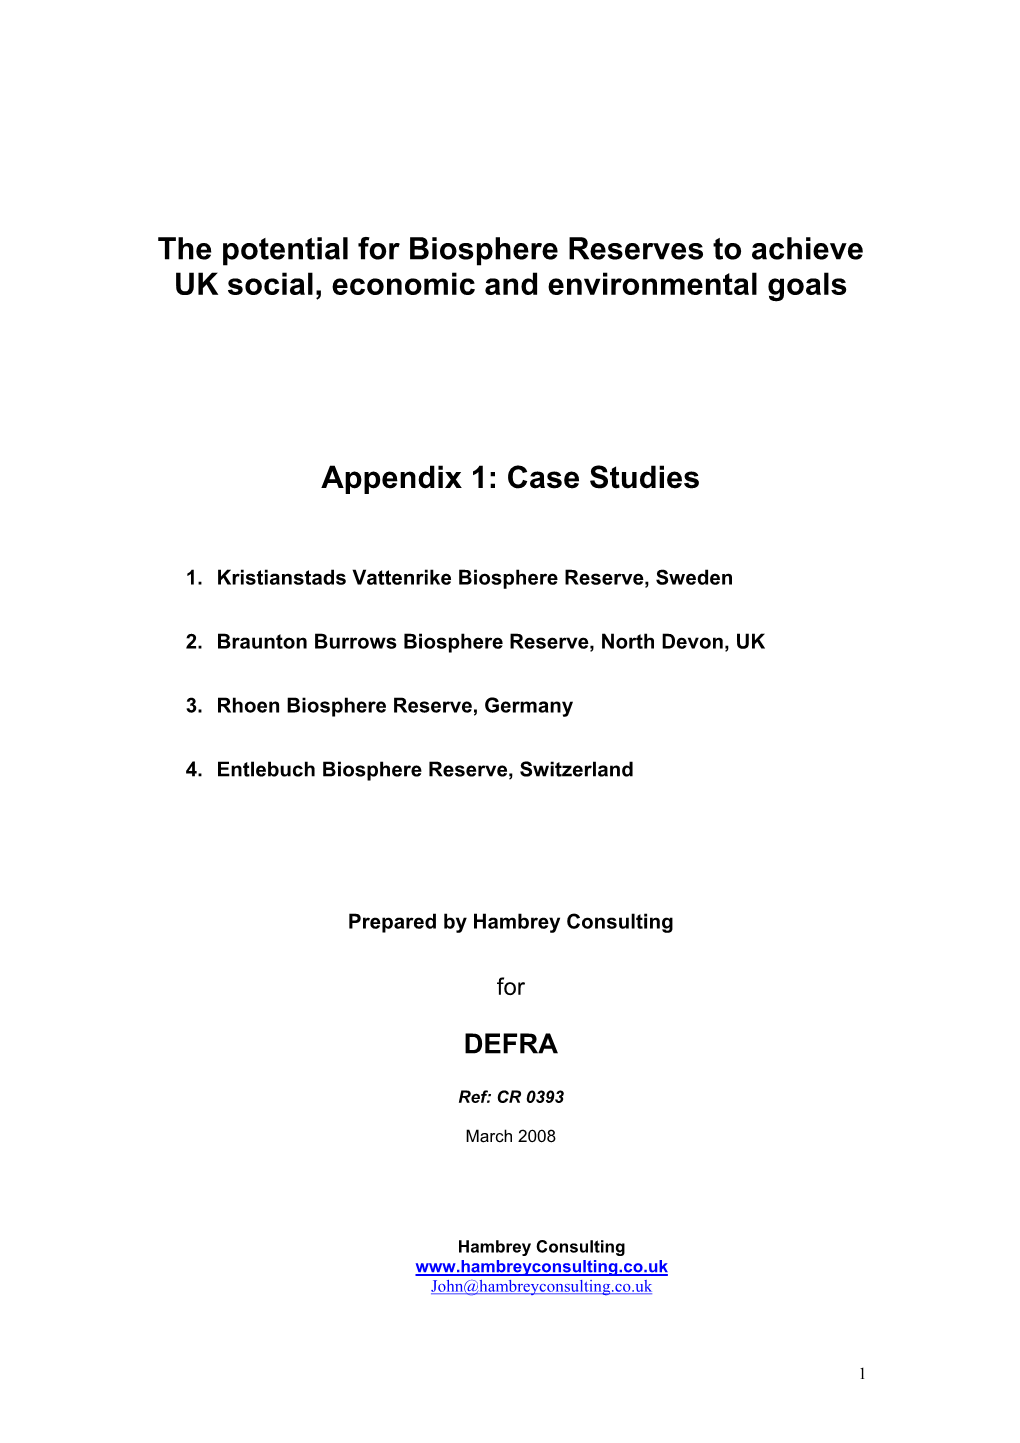 The Potential for Biosphere Reserves to Achieve UK Social, Economic and Environmental Goals